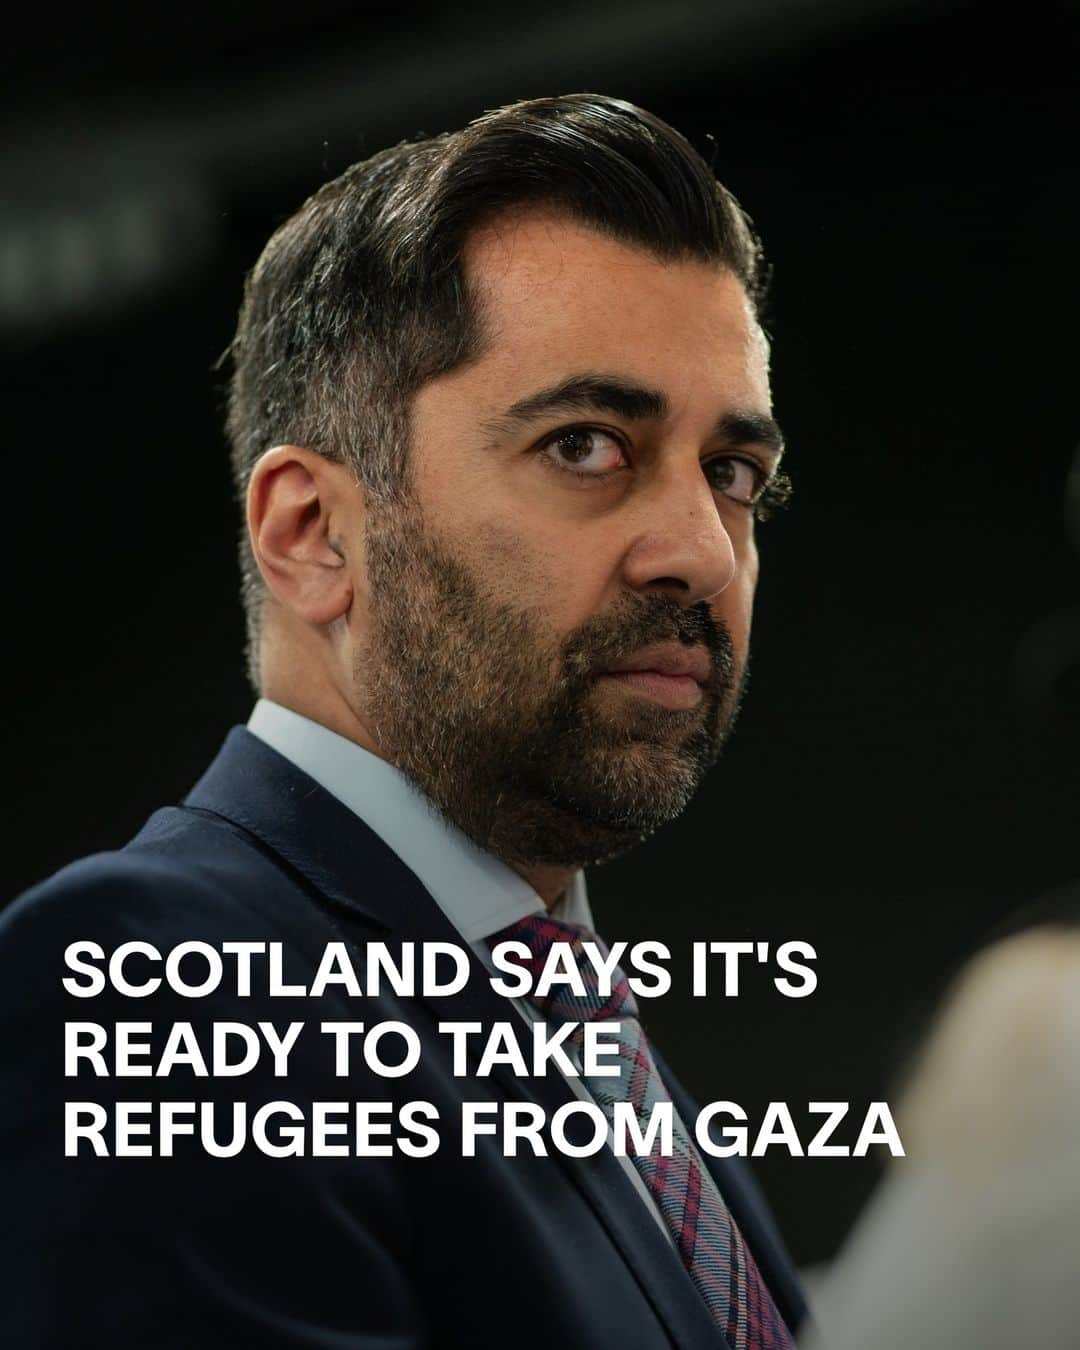 VICEのインスタグラム：「The First Minister of Scotland, Humza Yousaf, has announced his country is ready to offer asylum to the people of Gaza, making Scotland one of the first countries to welcome Palestinian refugees. ⁠ ⁠ "We have welcomed those from Syria, from Ukraine, and many other countries, and we must do so again," said Yousaf. “Scotland is willing to be the first country in the UK to offer safety and sanctuary to those who are caught up in these terrible attacks," he added.⁠ ⁠ He also called upon the international community to "commit to a worldwide refugee programme" for the one million people displaced within Gaza. ⁠ ⁠ "My brother-in-law is a doctor in Gaza," he said. "When we can get through to him on the phone, he tells of the scenes of absolute carnage. Hospitals are running out of medical supplies, doctors, and nurses having to make the most difficult decision of all: who to treat and who to let die. That can't be allowed, not in this day and age.”」